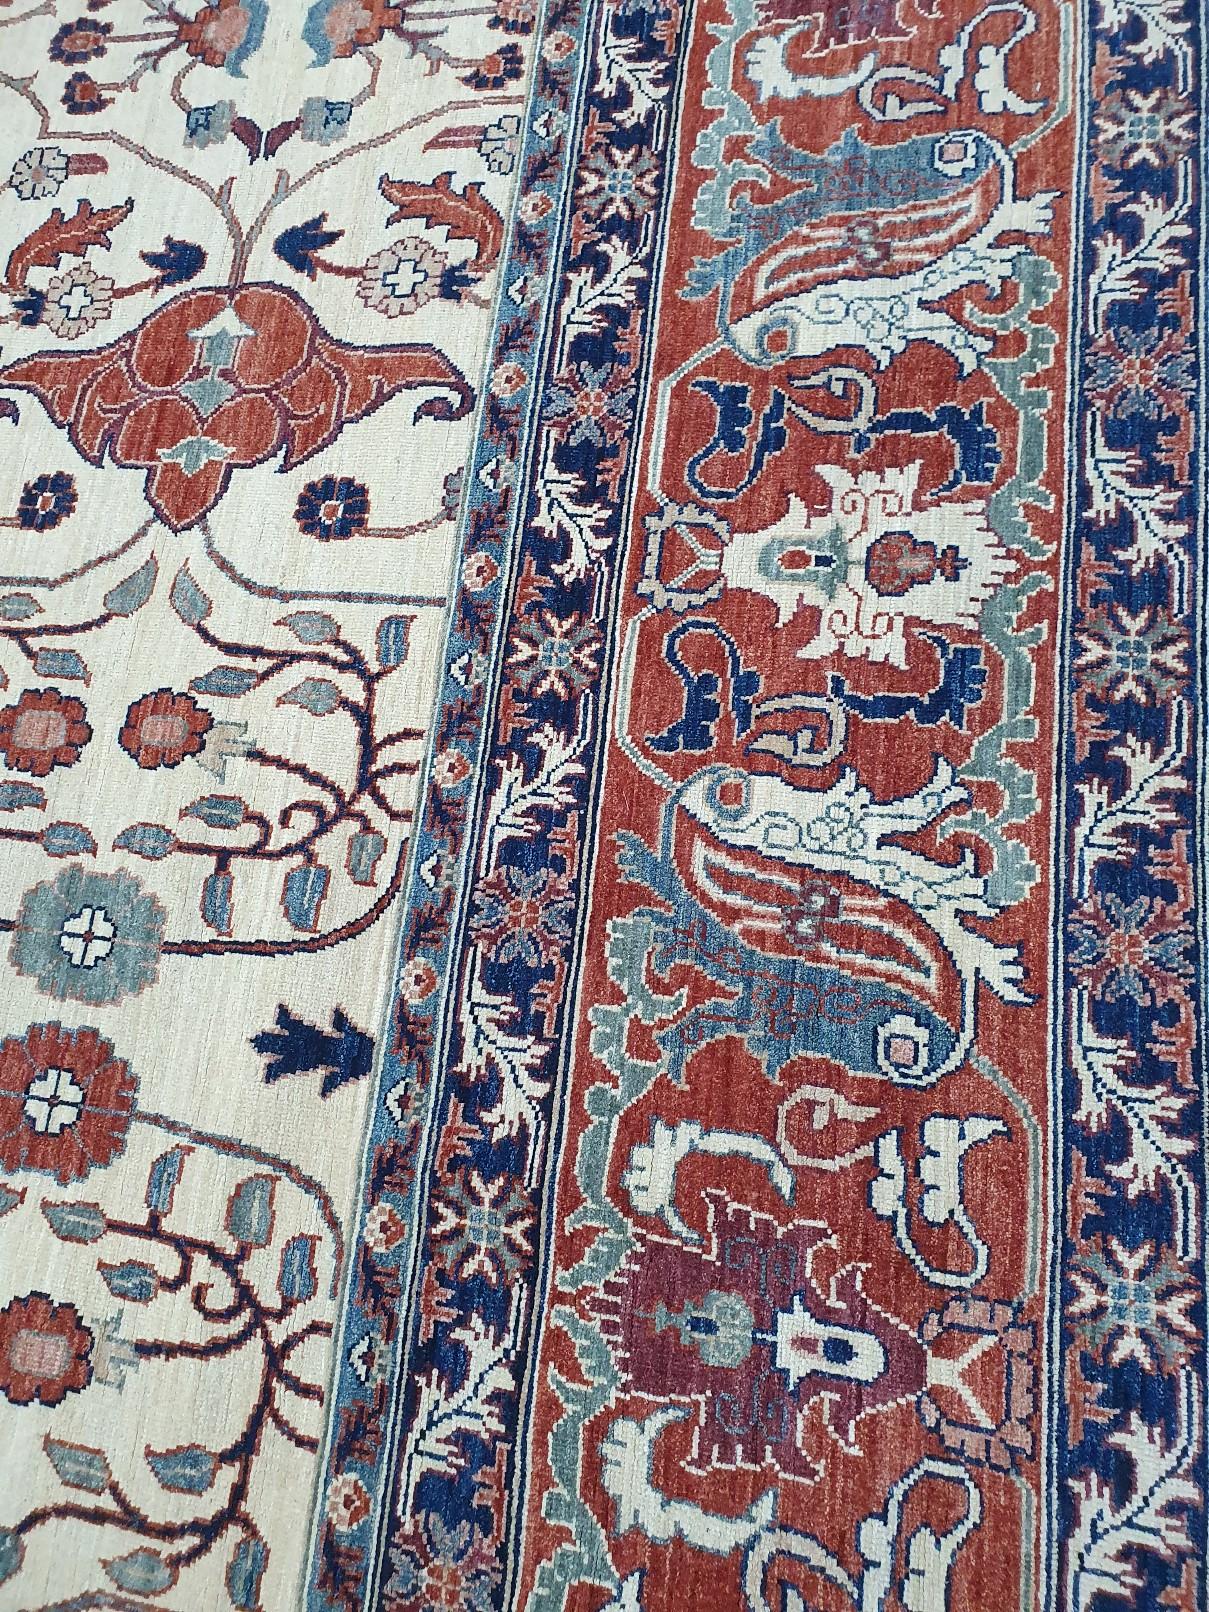 26 x 18 ft Palace Size Rug in Style of Farahan hand knotted 800 x 550 cm 1